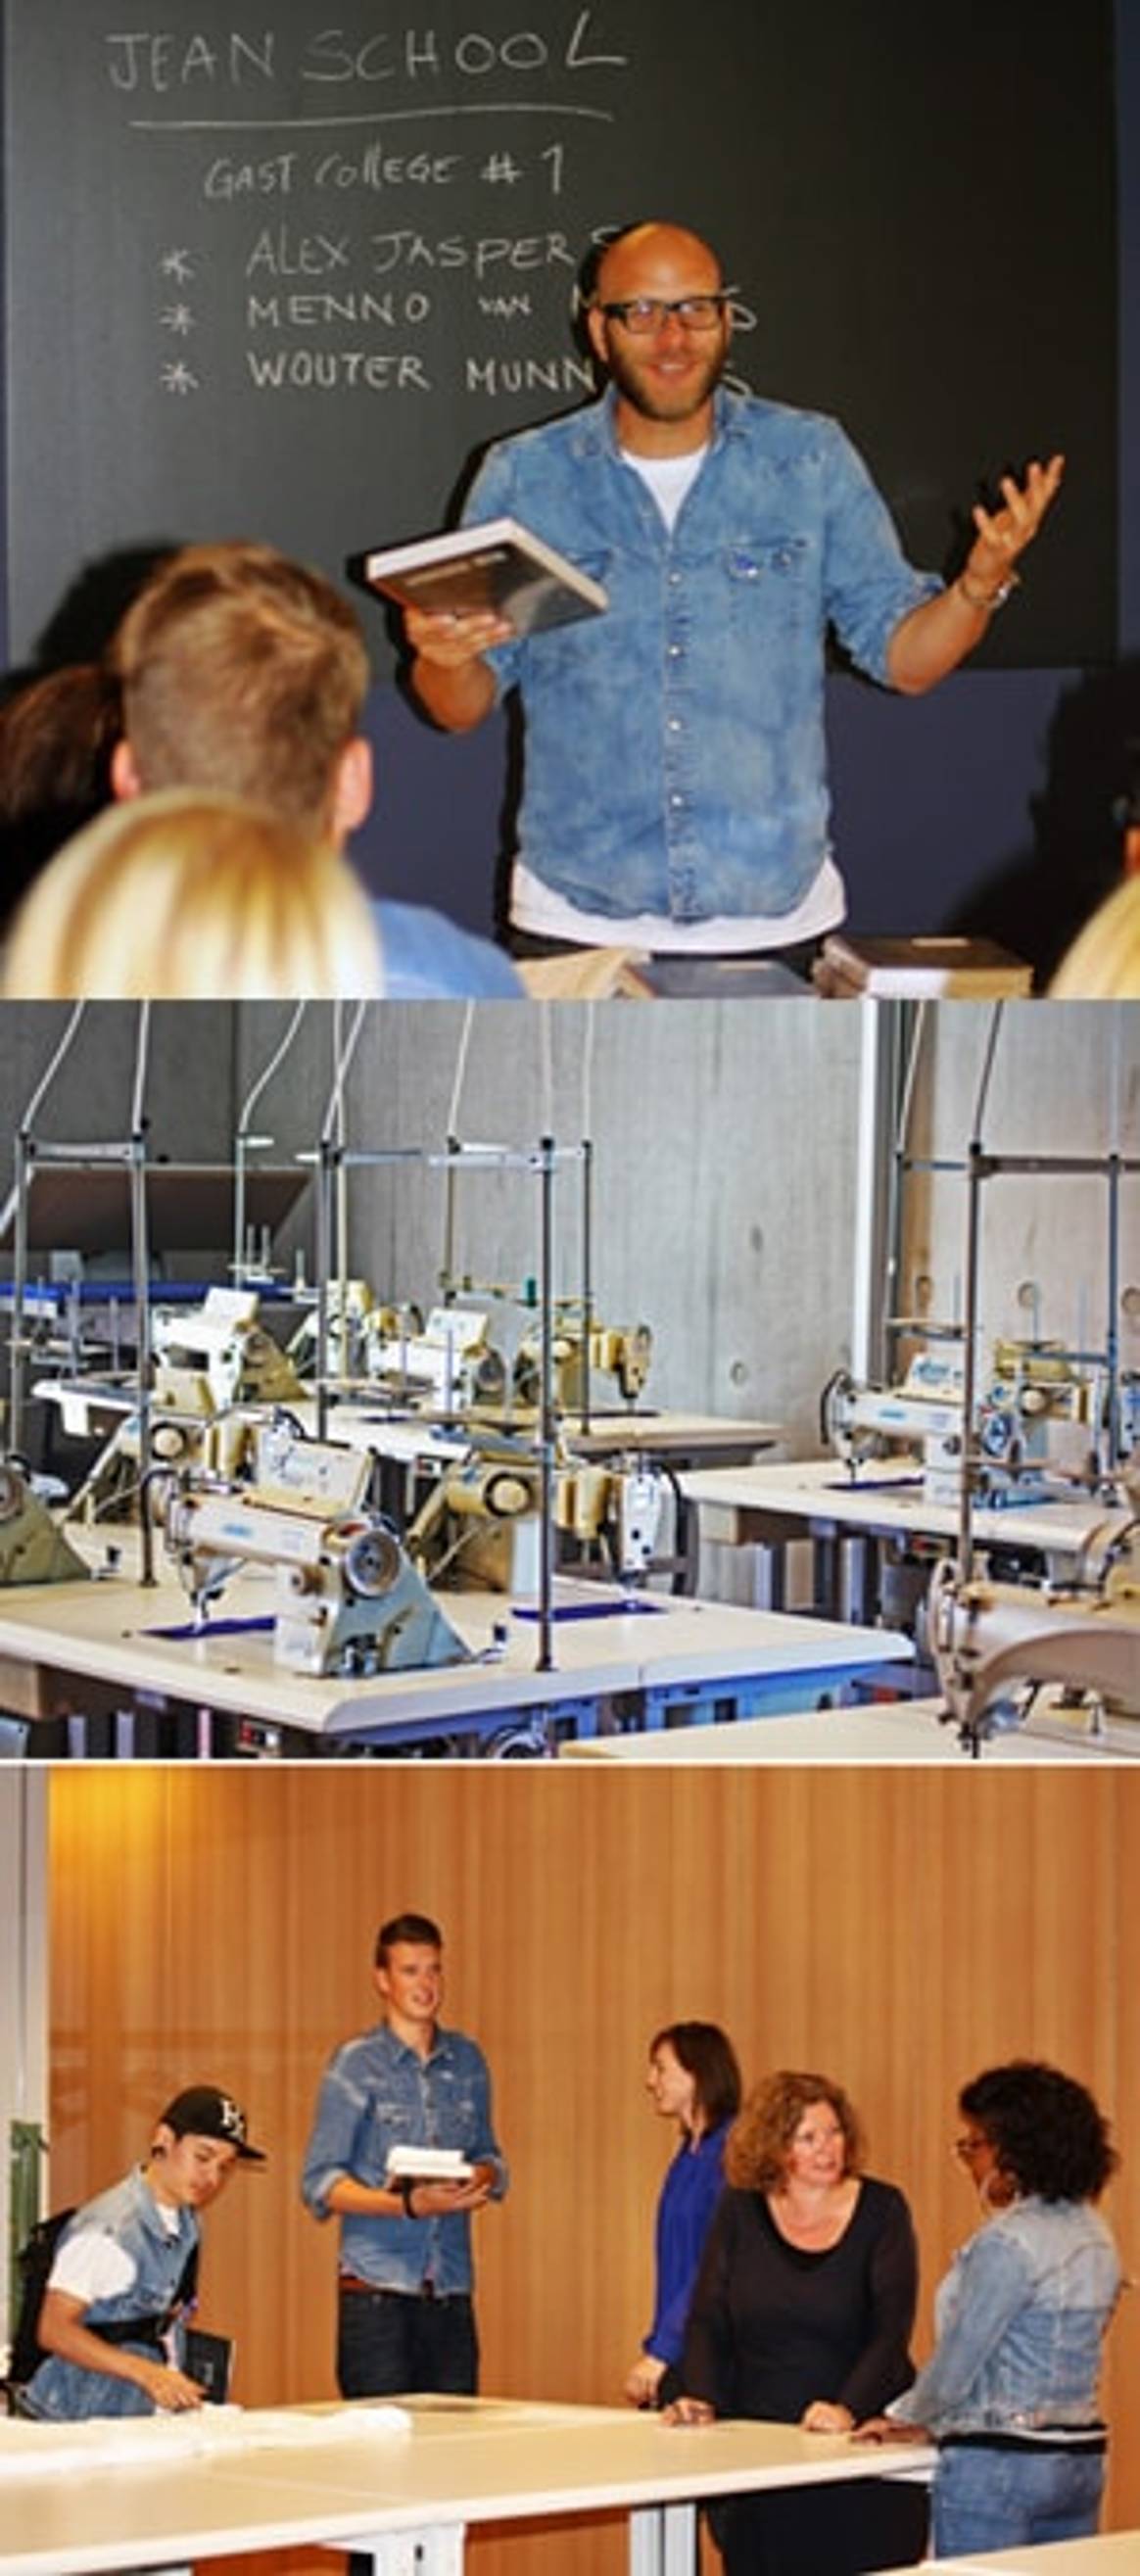 First official Jean School opens in Amsterdam